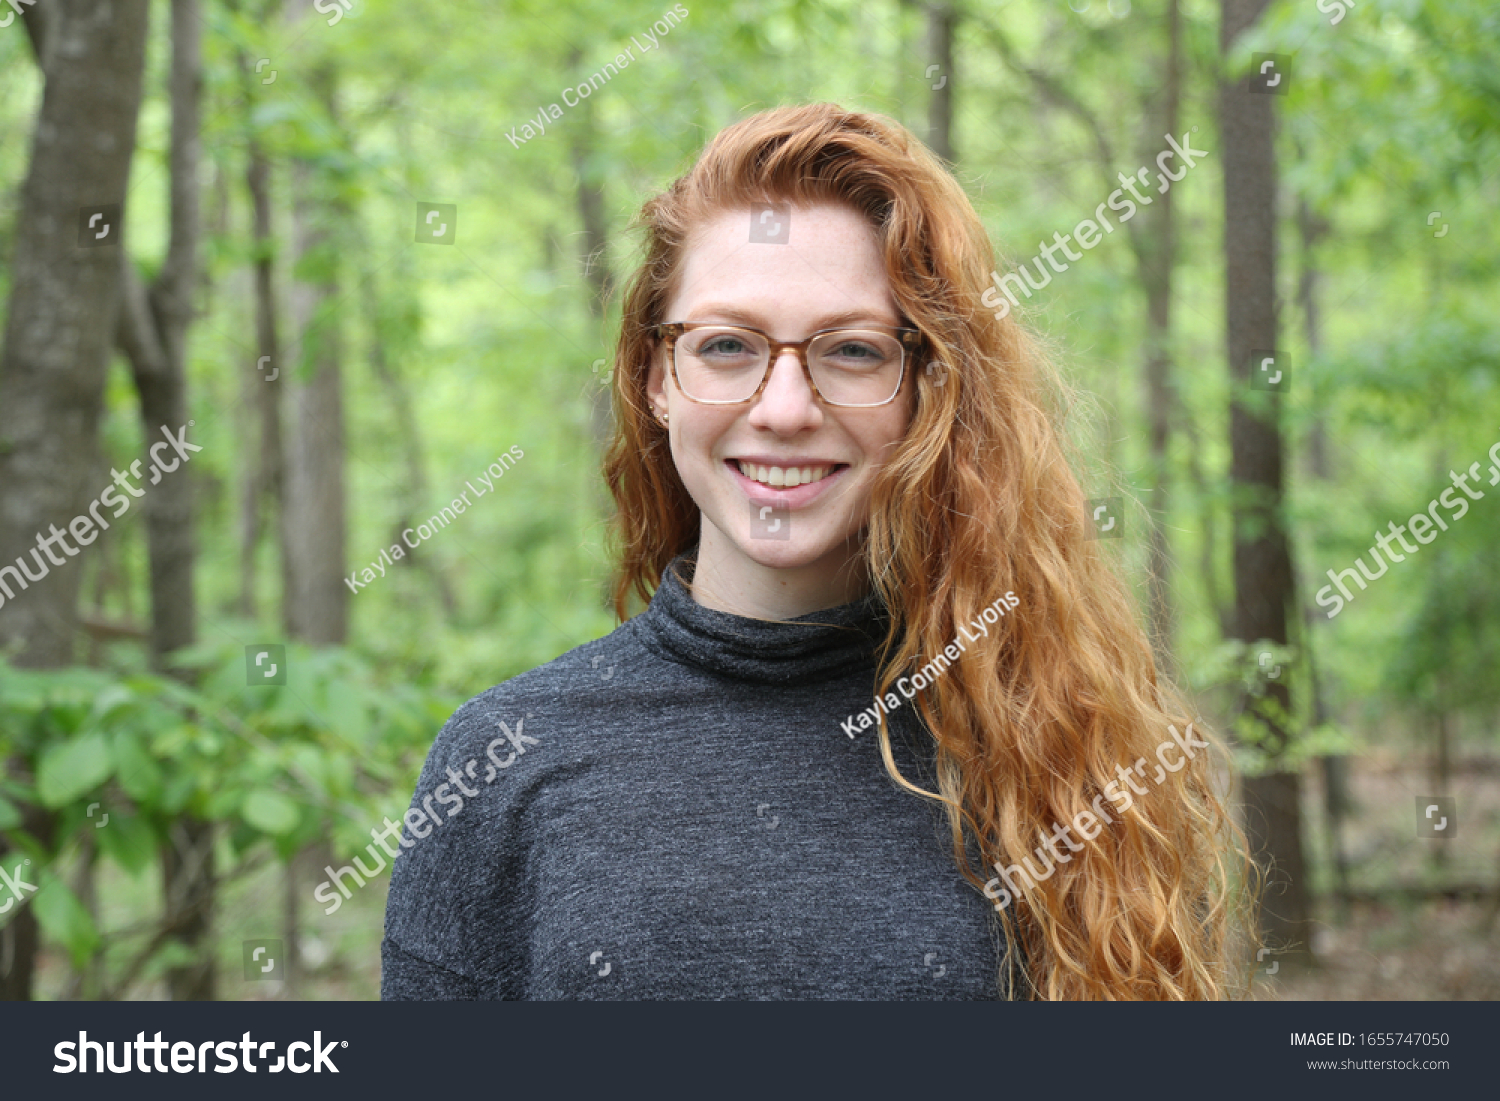 Young adult profile picture with red hair. #1655747050